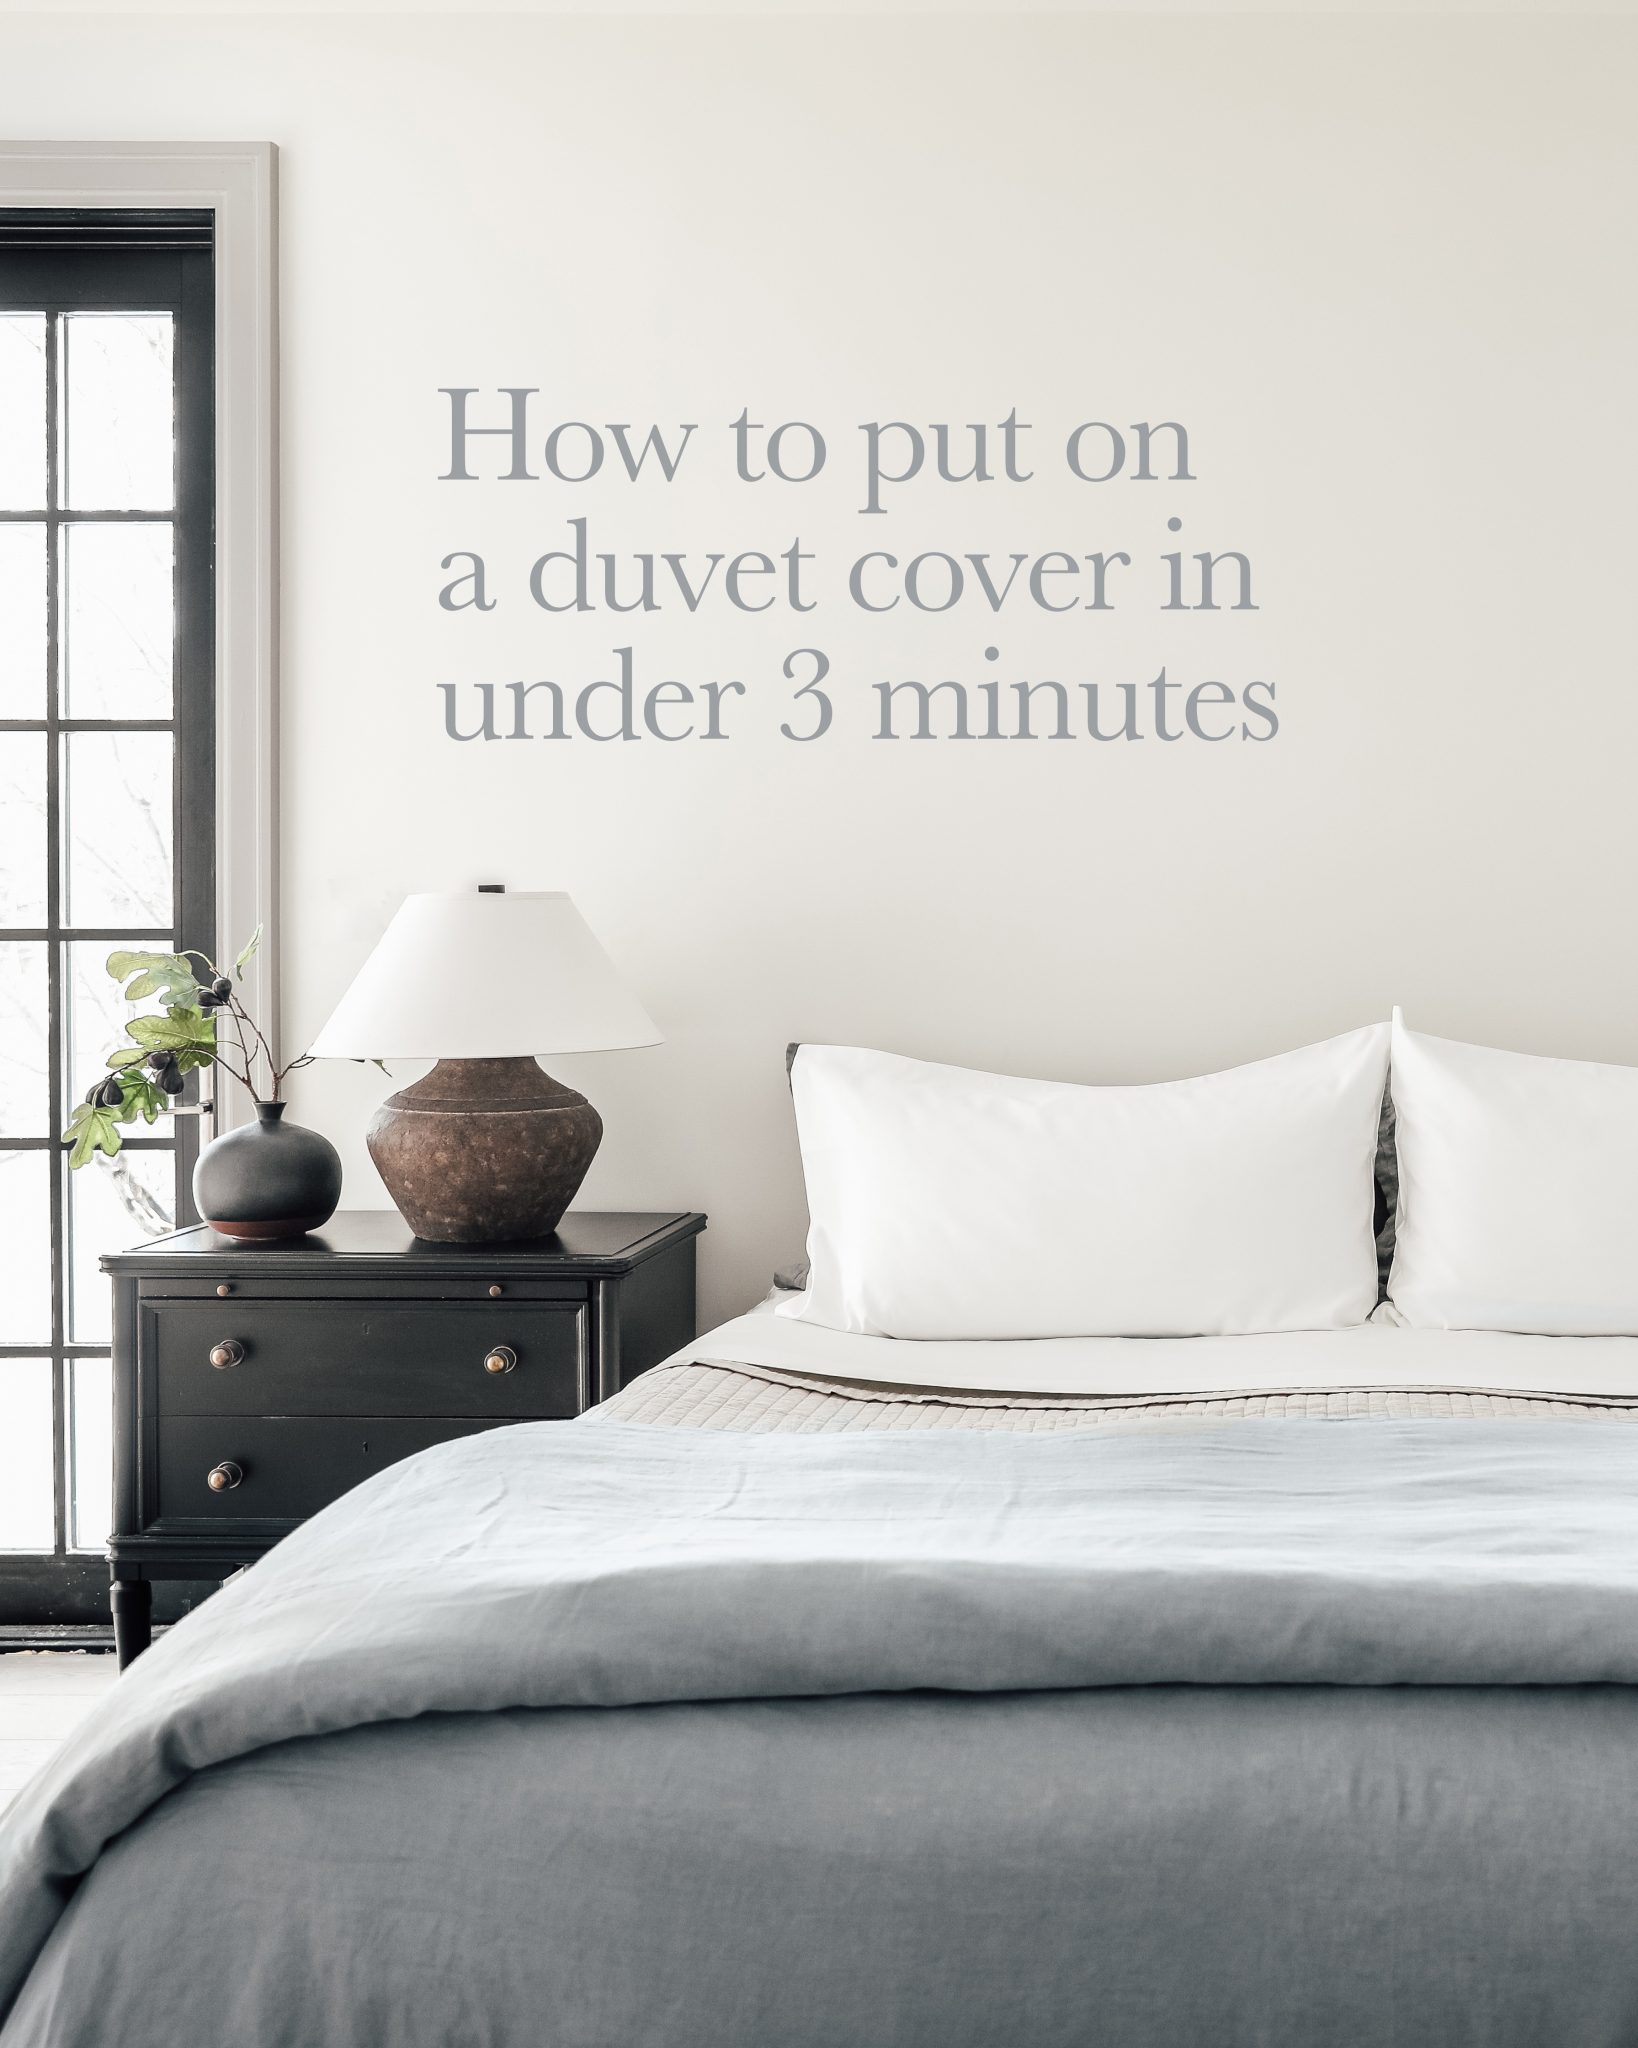 How To Put On A Duvet Cover In Under 3, Easiest Way To Put A Duvet Cover On Comforters